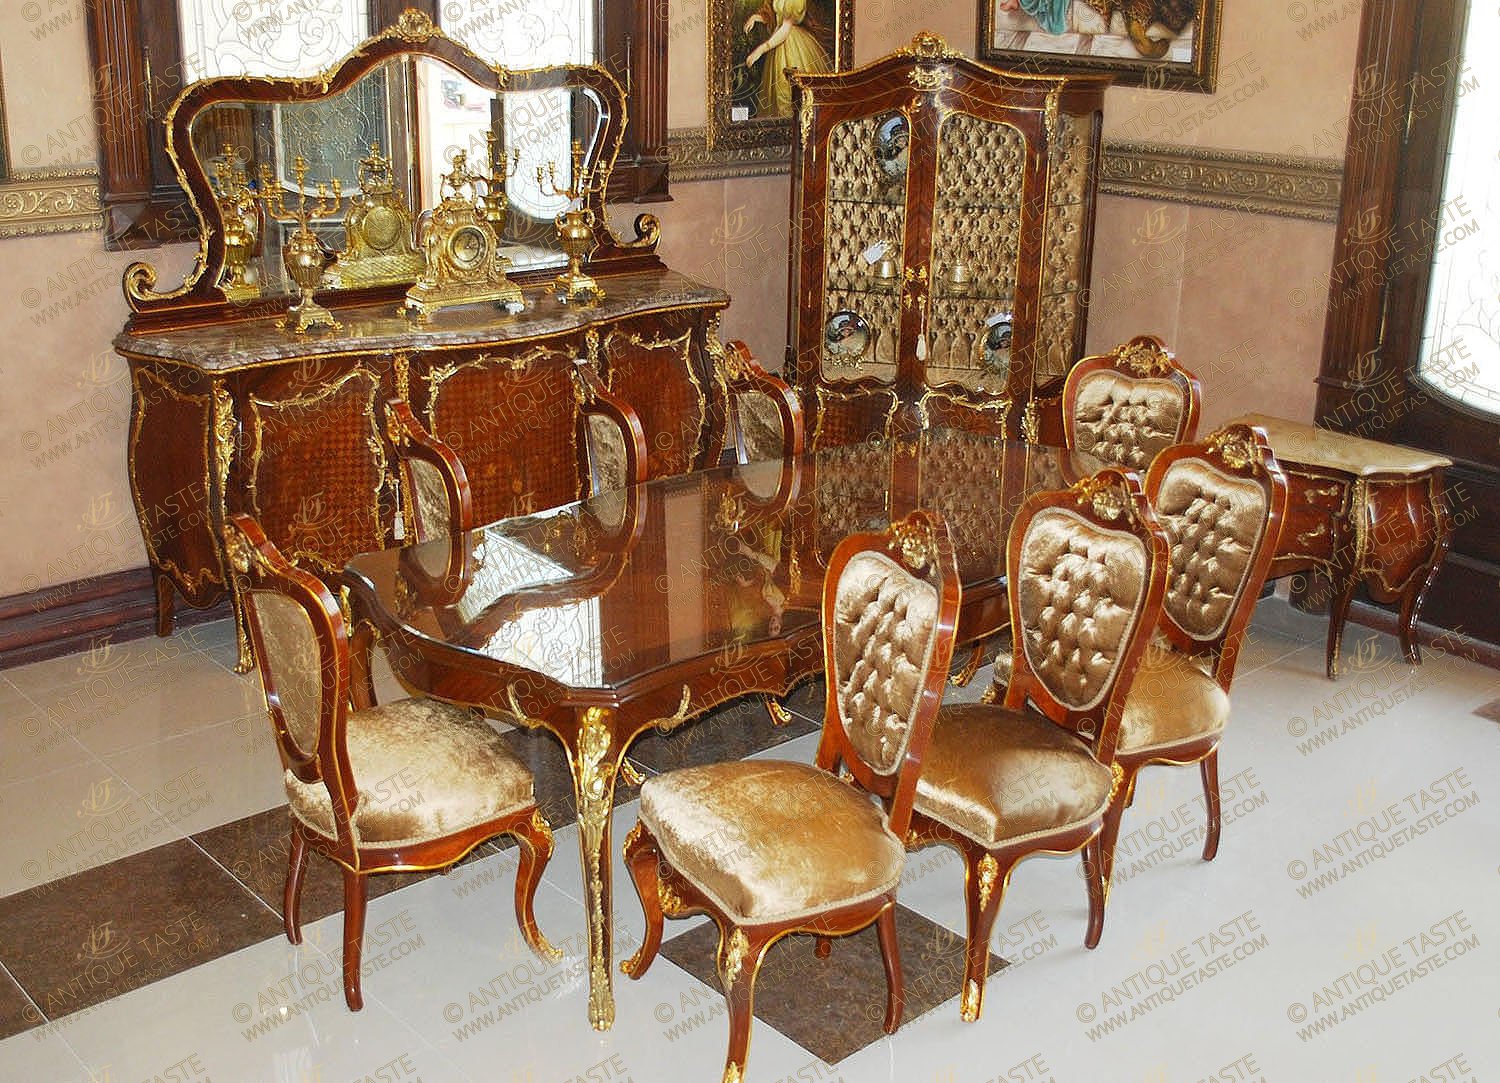 An alluring French late 19th Century Louis XV style eleven pieces luxury Dining Room Set after the model by François Linke, sensationally ormolu-mounted with finely chiseled scrolling foliage, waterfall, cresting, acanthus leaves, swaging garlands, hammered ormolu bands and sophisticated pierced ormolu works; inlaid in double sans-traverse veneer, foliate marquetry patterns and harmonious diamond parquetry; comprising of a dining table, eight dining chairs, buffet with mirror and china cabinet.